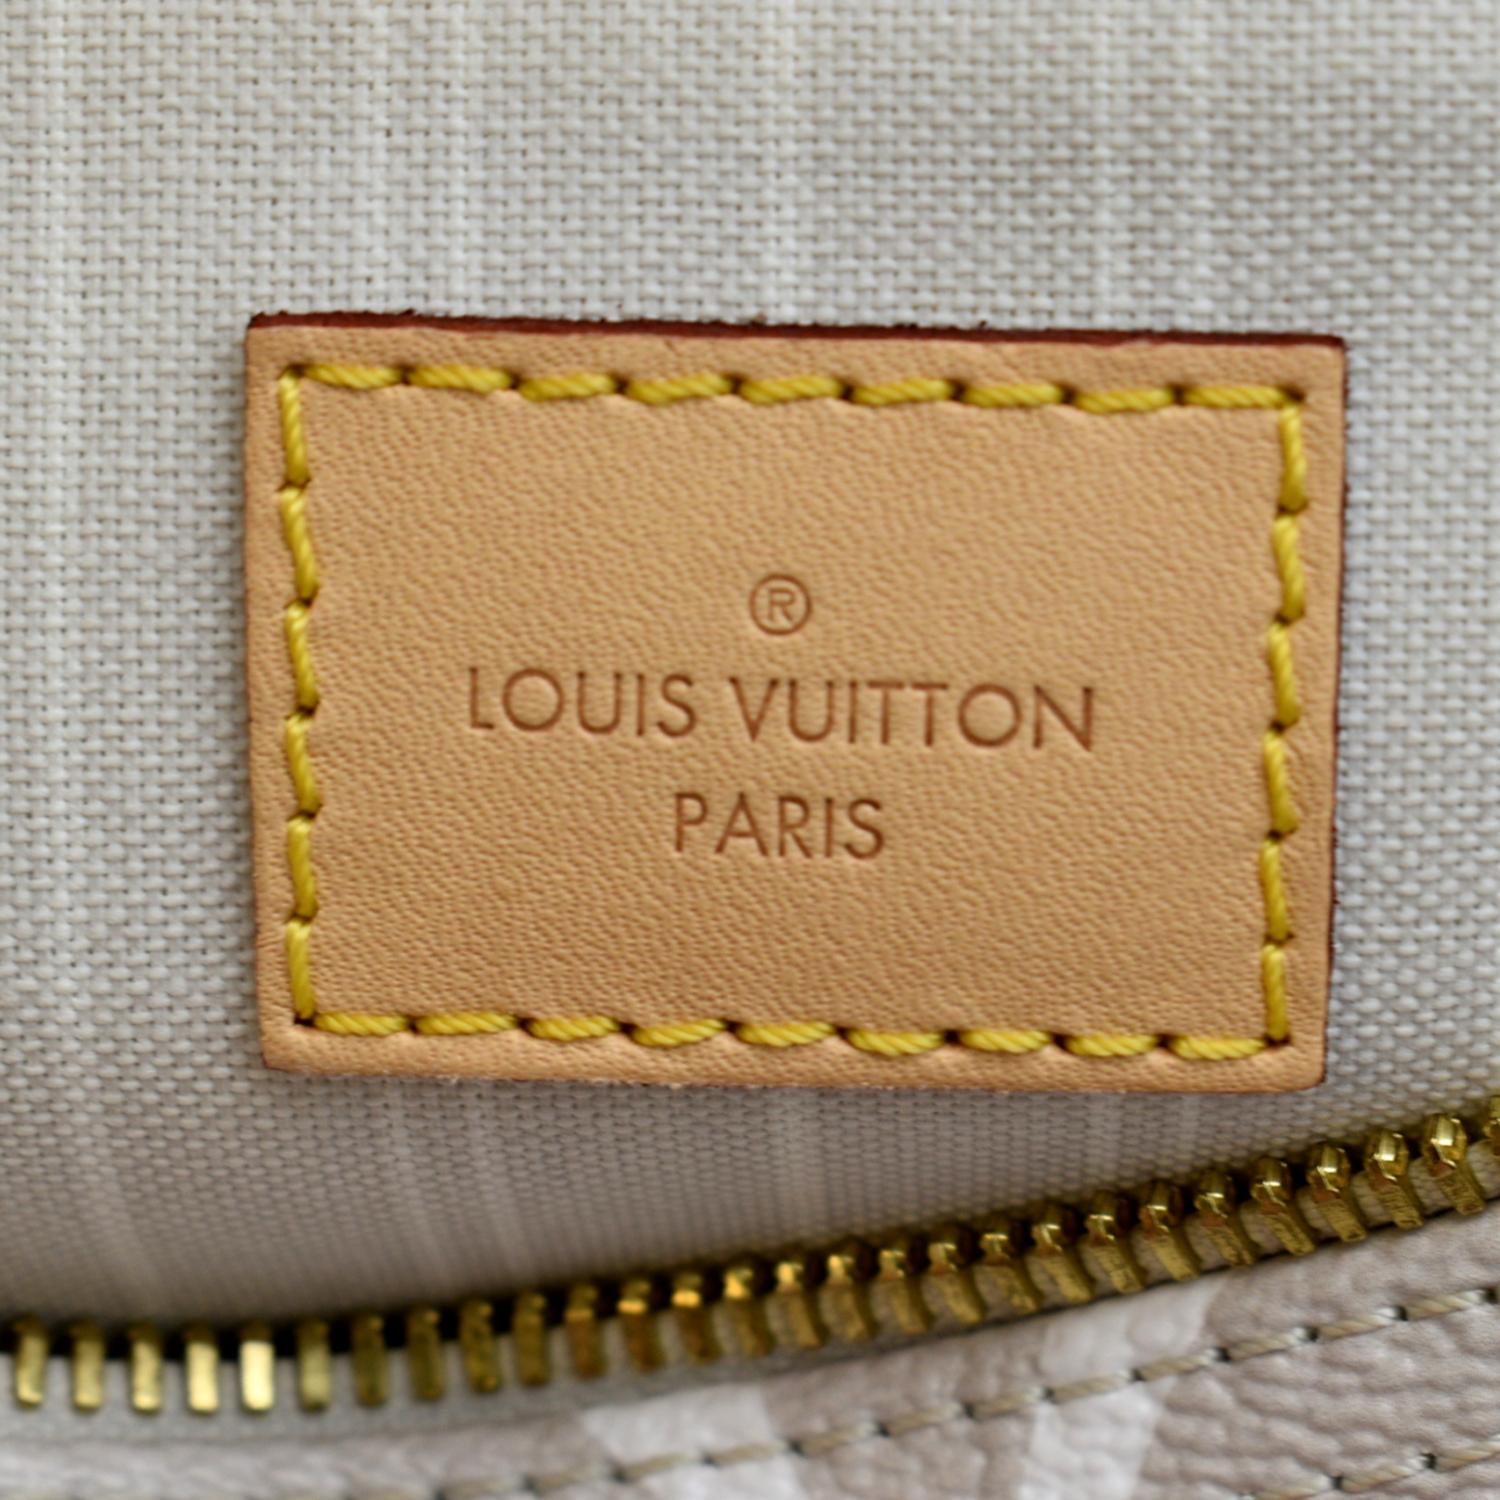 Louis Vuitton Speedy Bandouliere 25 By The Pool Giant Bag